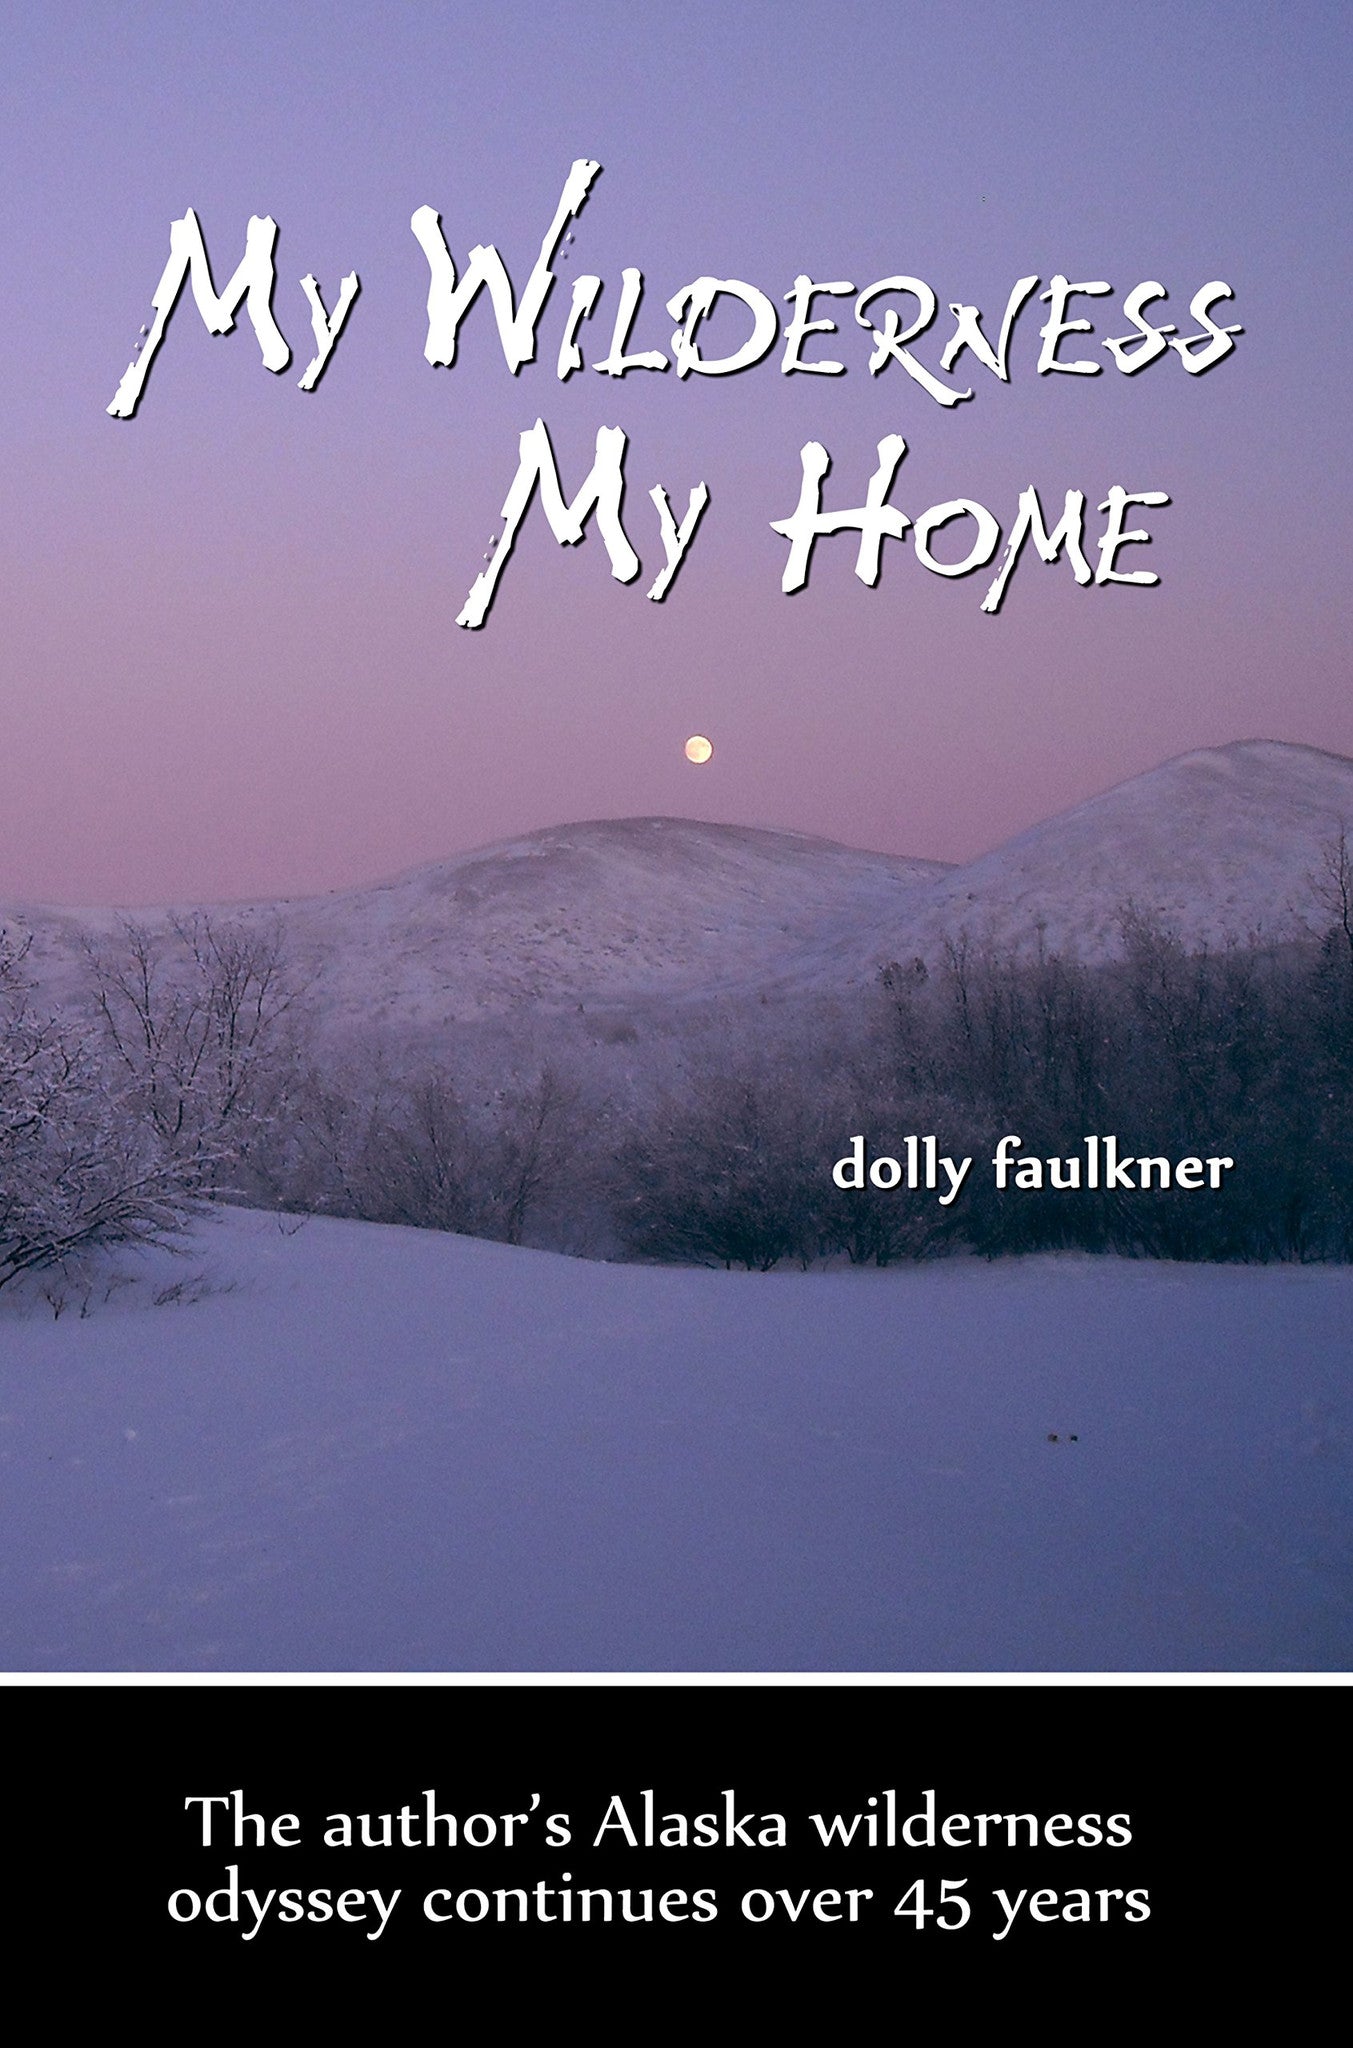 My Wilderness, My Home by Dolly Faulkner